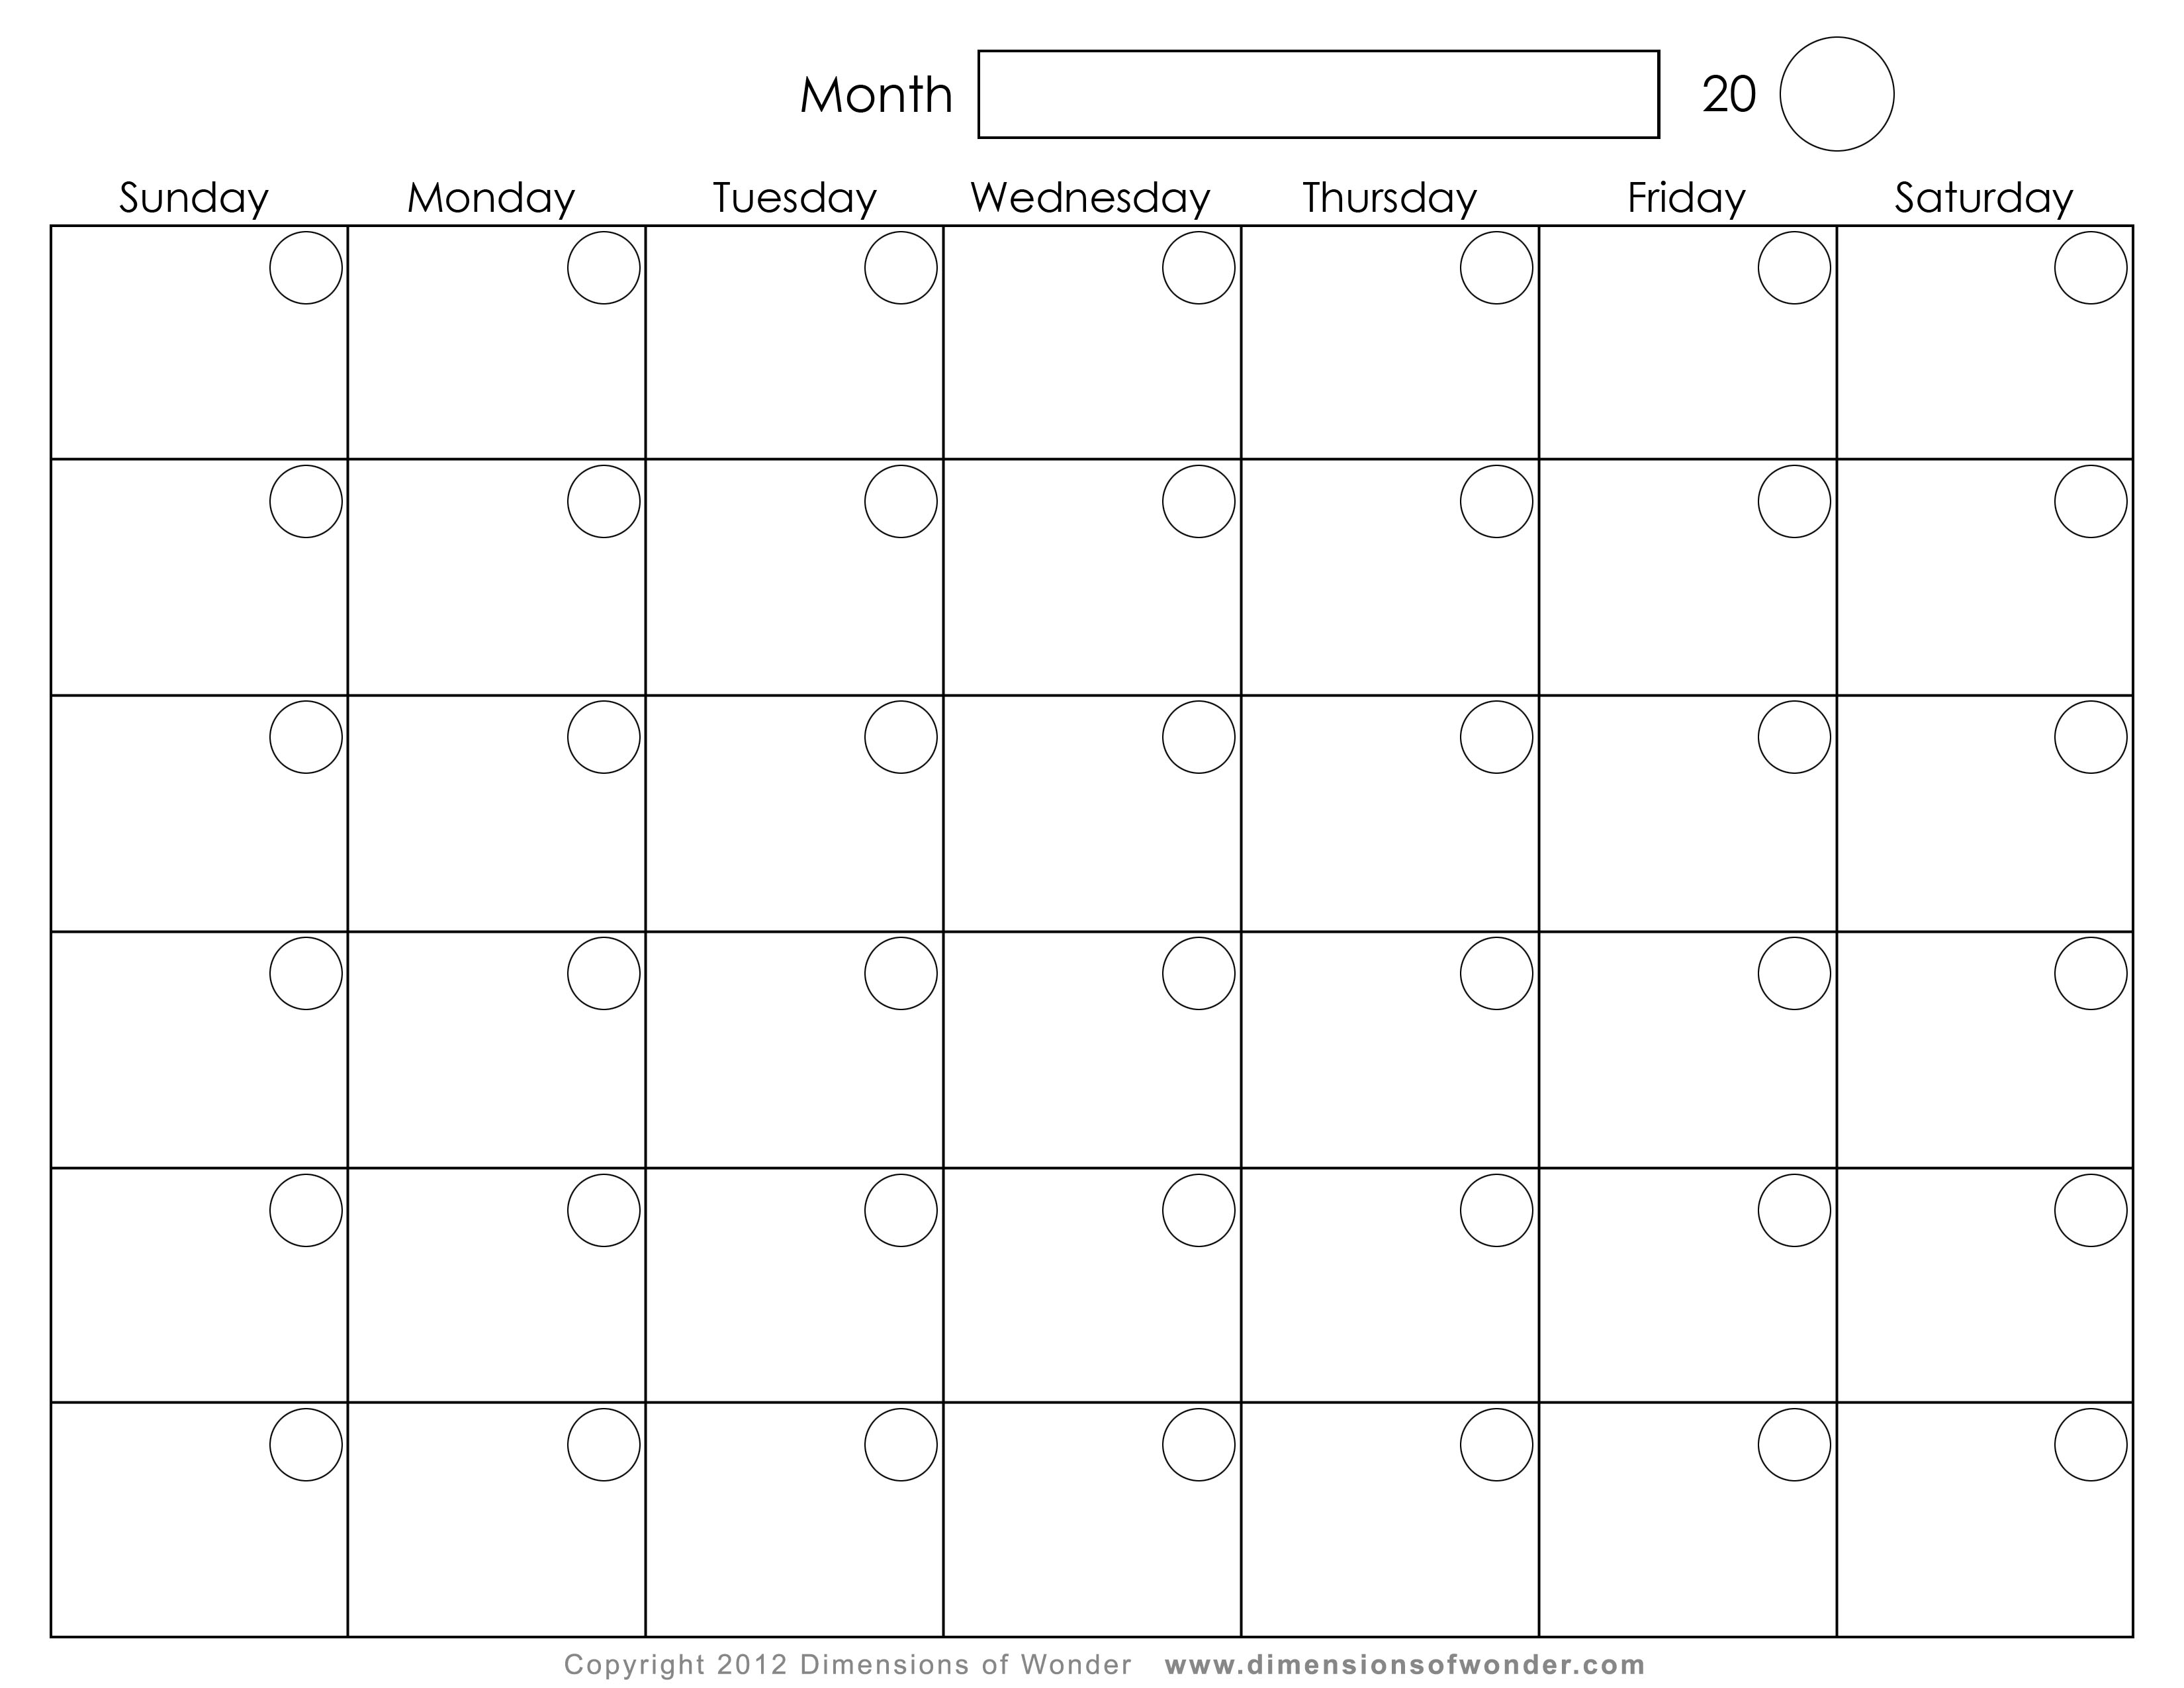 free-printable-monthly-calendar-by-dimensions-of-wonder